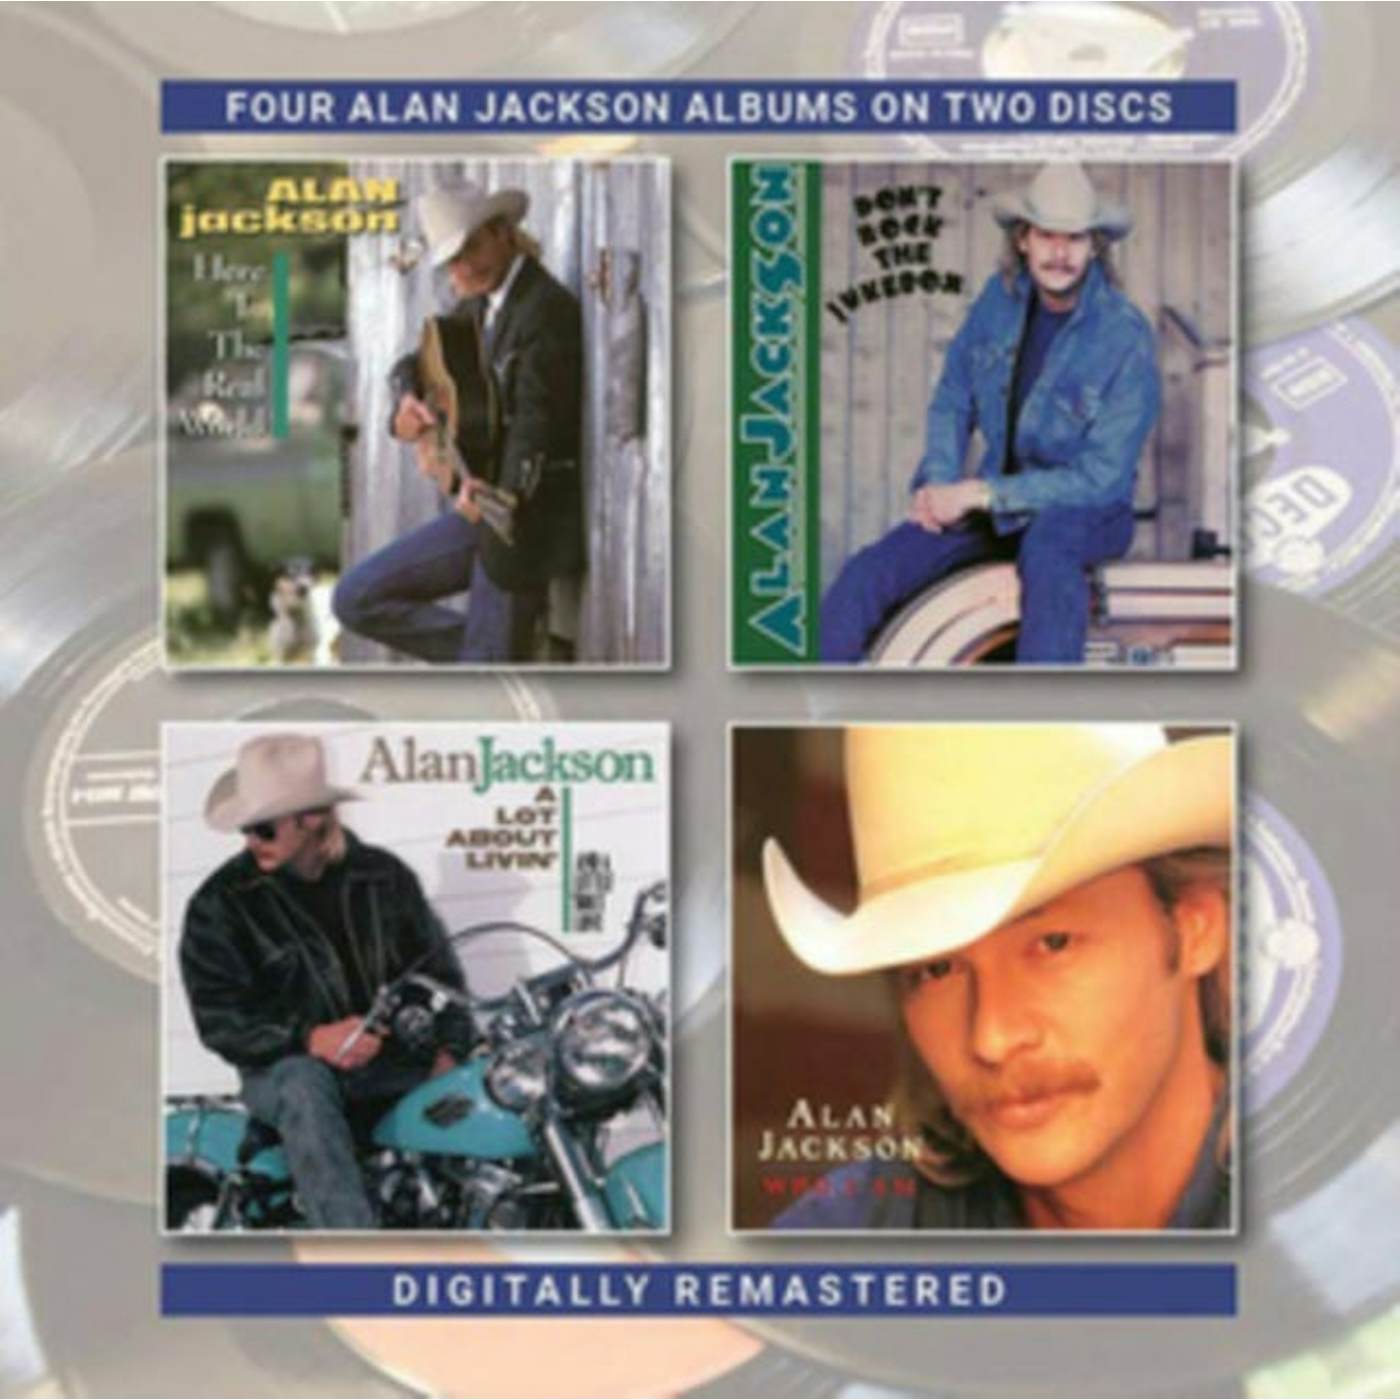 Alan Jackson CD - Here In The Real World / Don't Rock The Jukebox / A Lot About Livin (&A Little Bout Love) / Who Am I